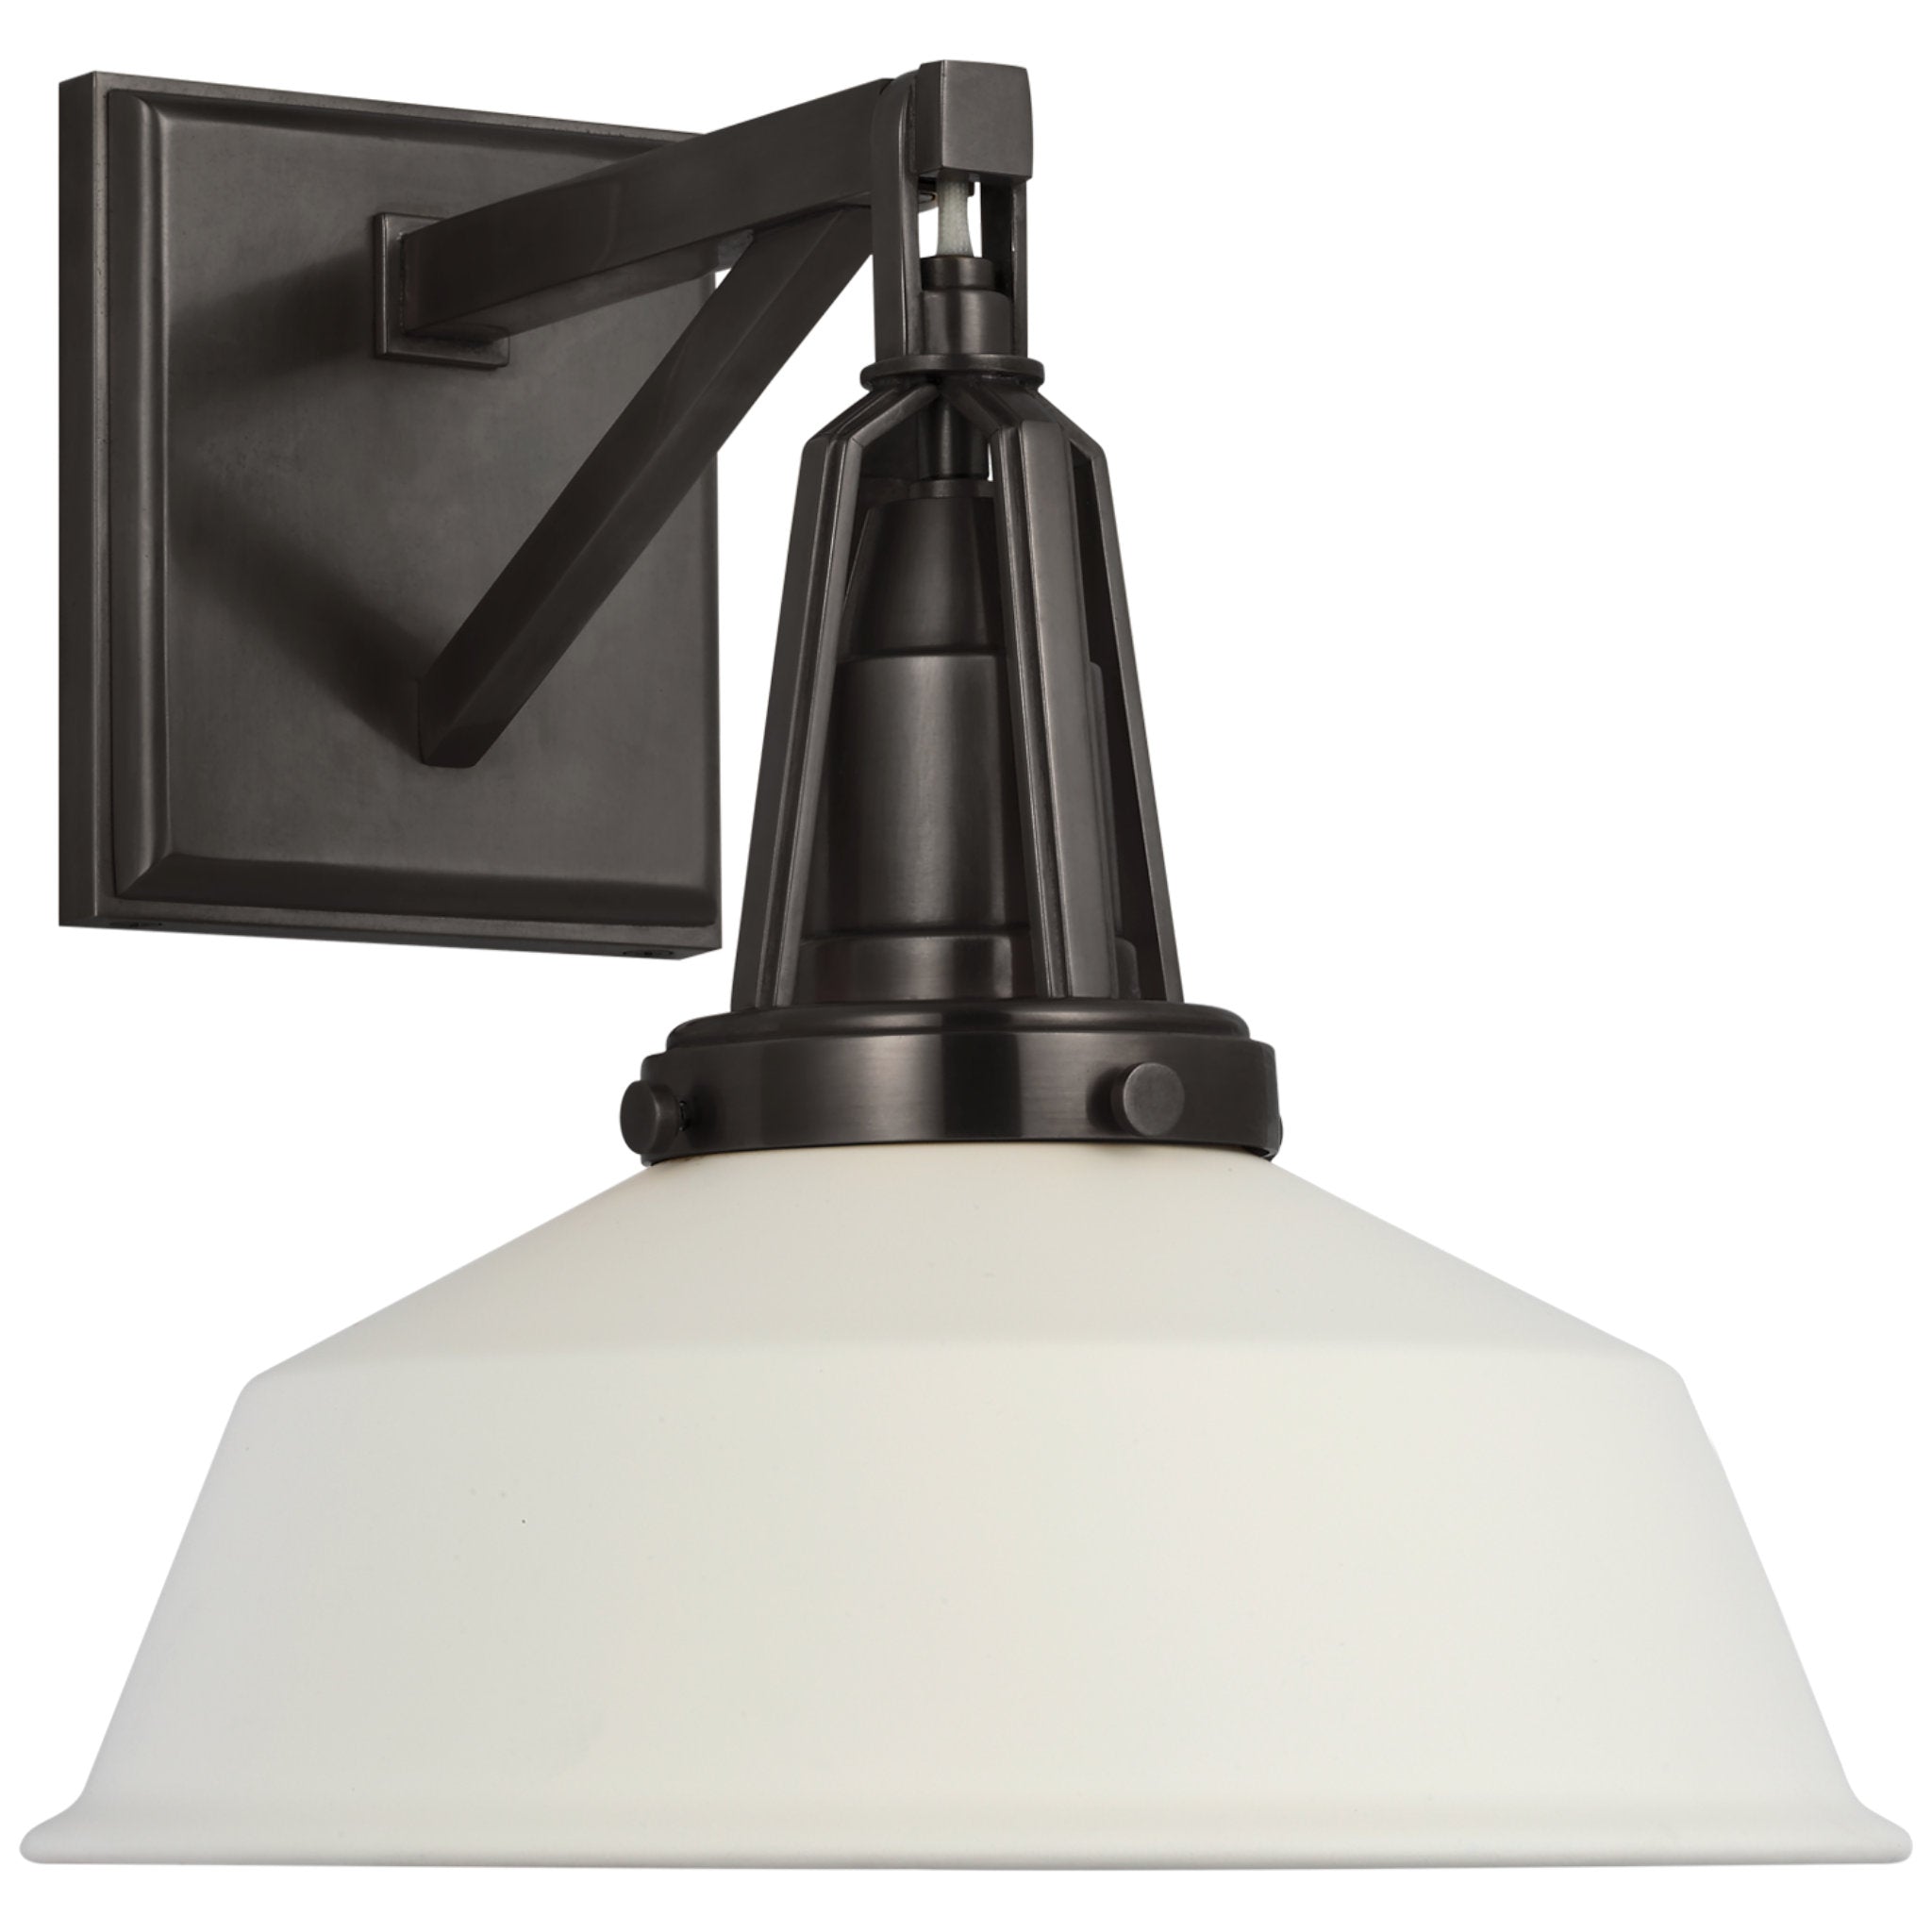 Chapman & Myers Layton 10 Sconce in Polished Nickel with Matte Black